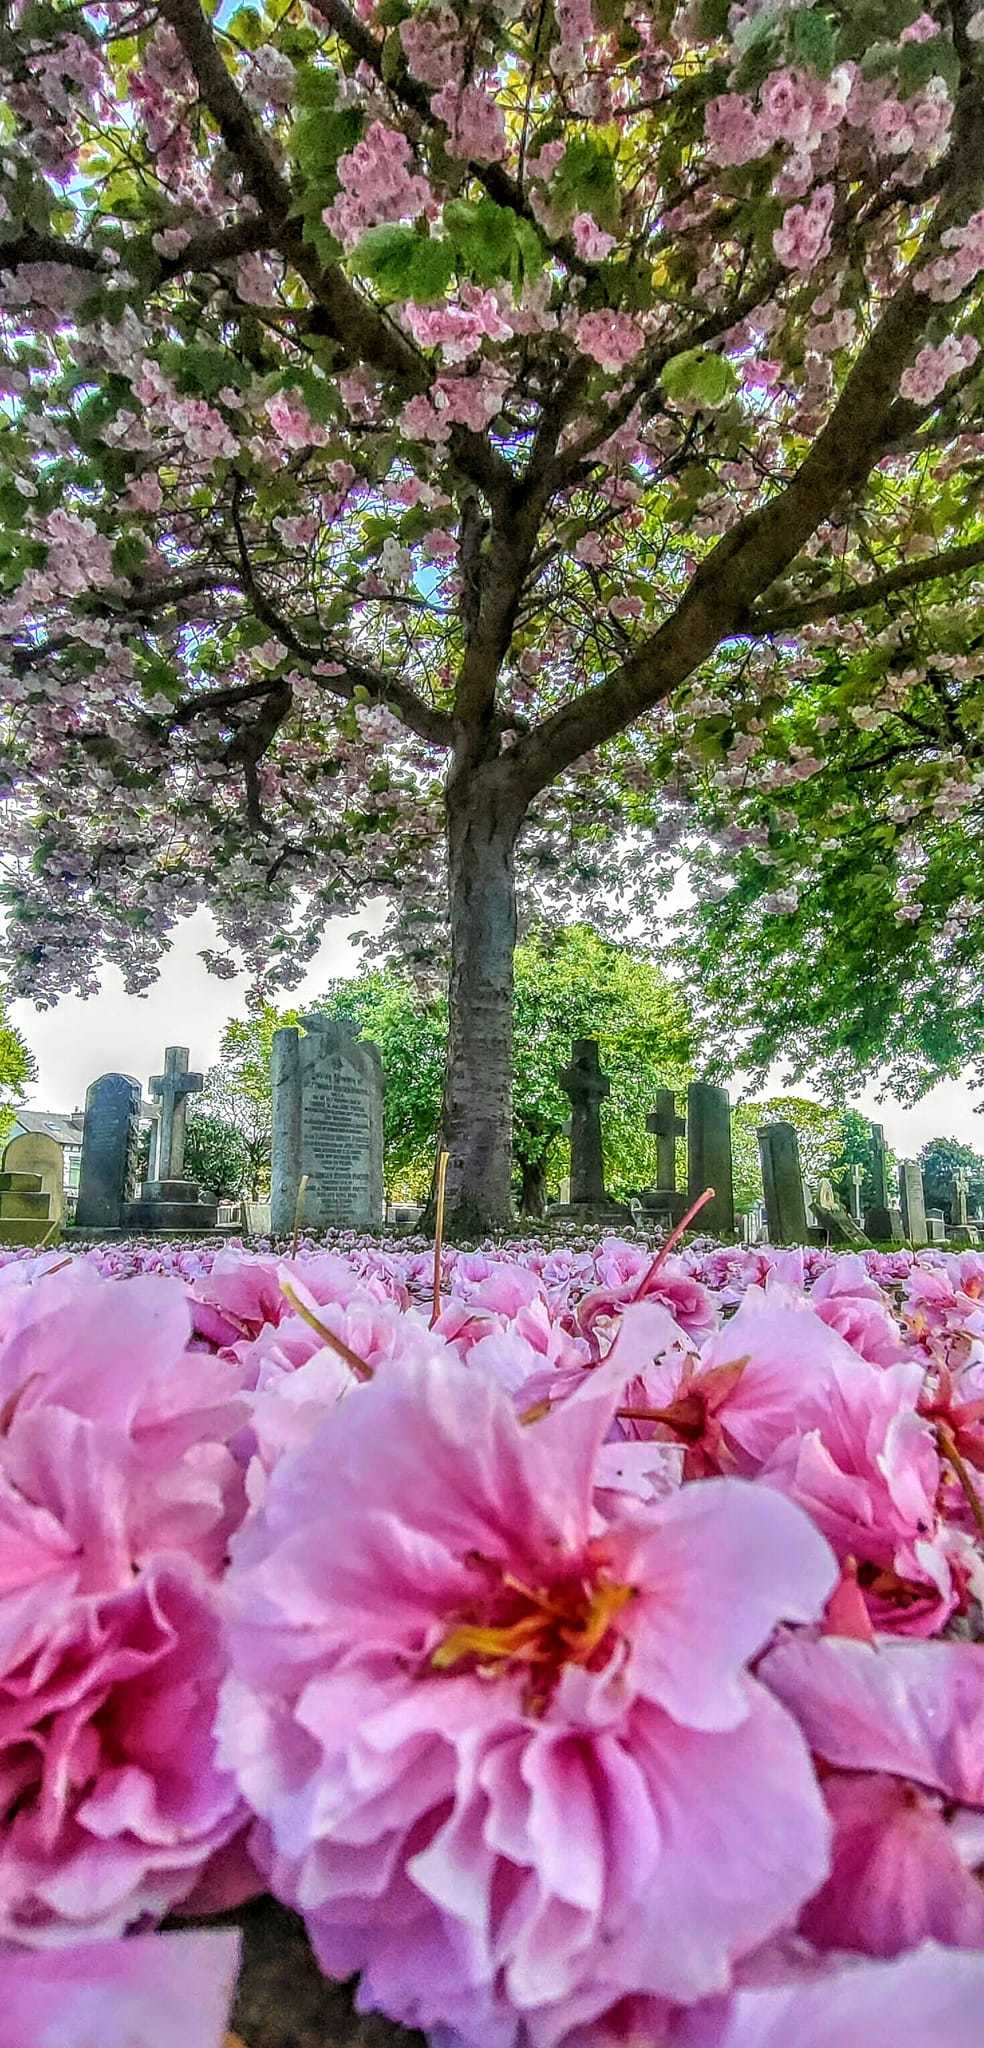 Cherry blossom at Wallasey cemetery by Kimberley Phillips